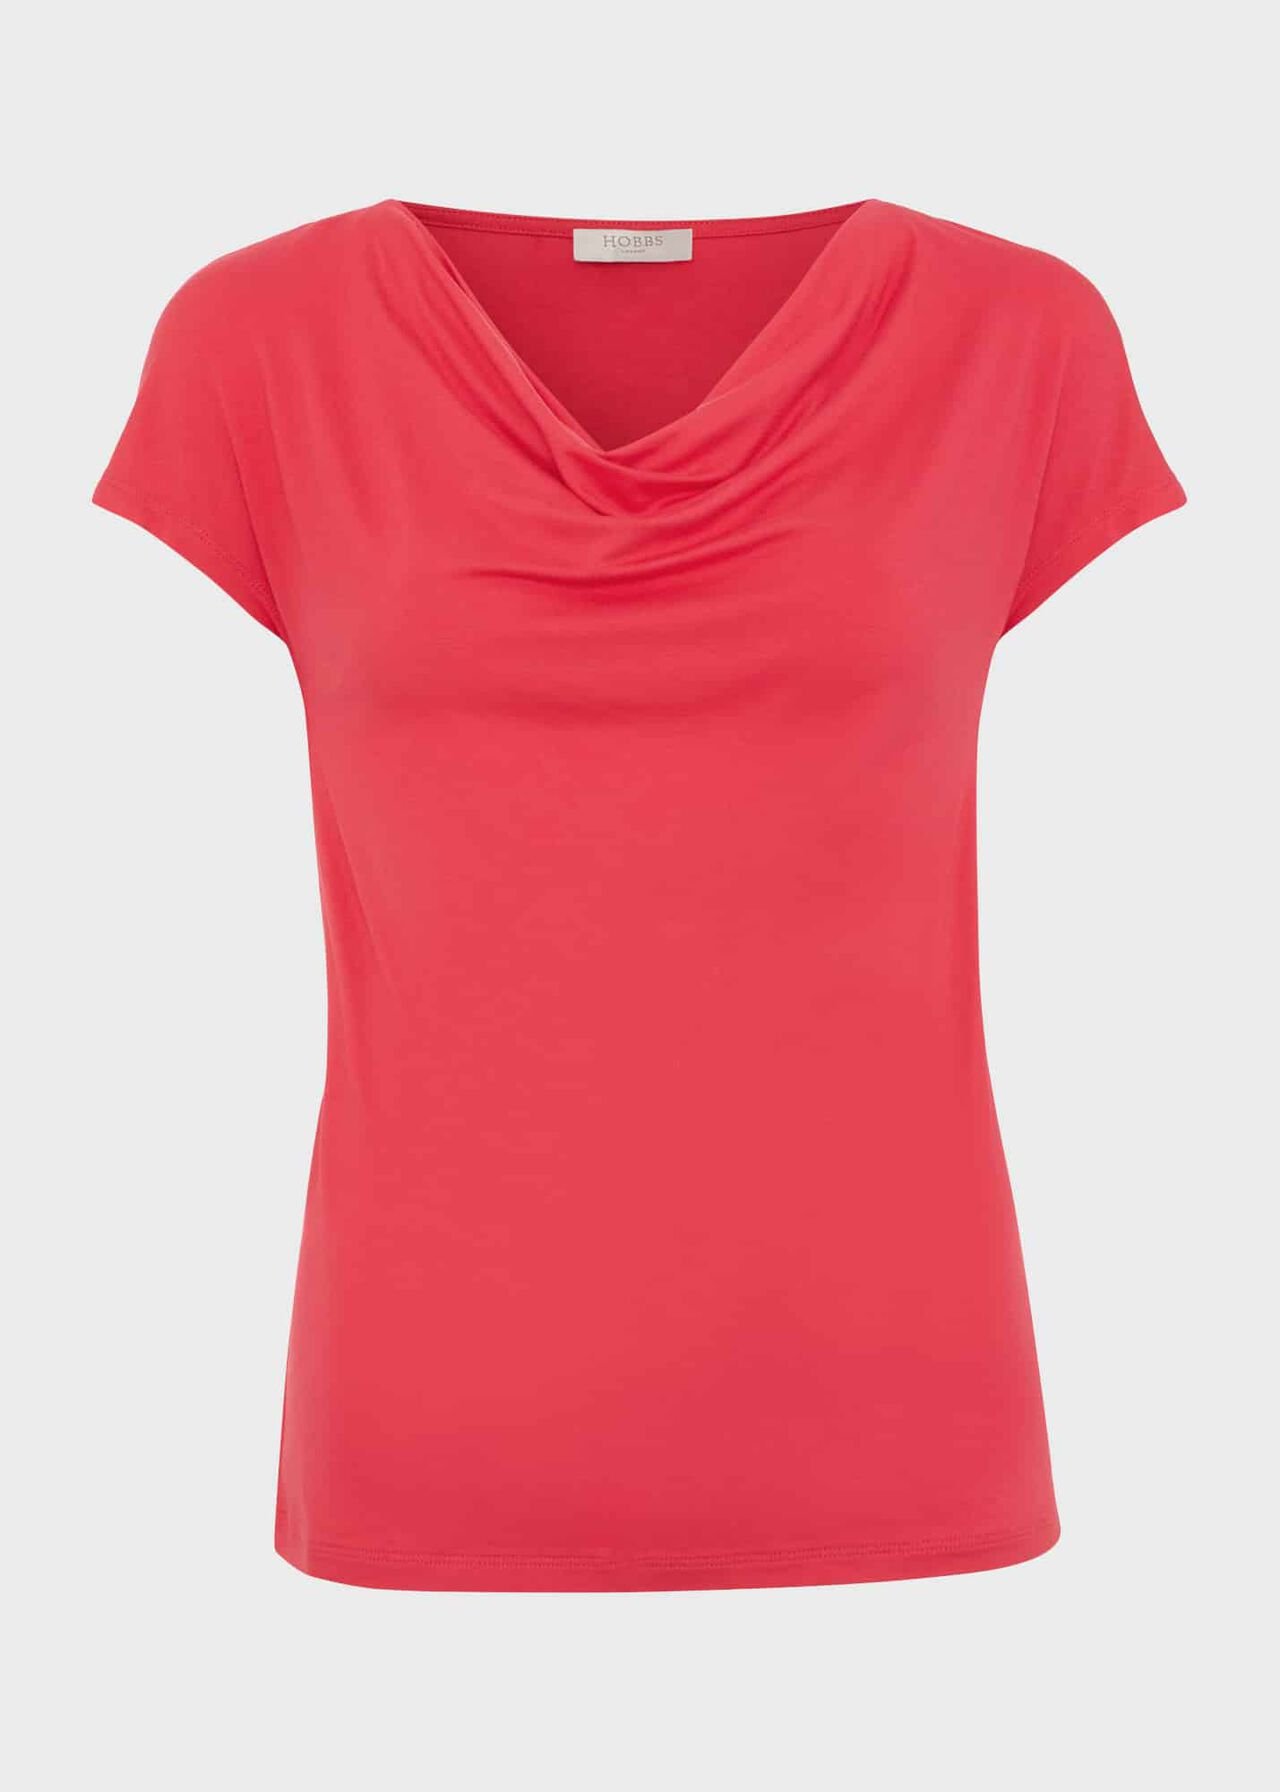 Cathy Cowl Neck Top, Rouge Pink, hi-res